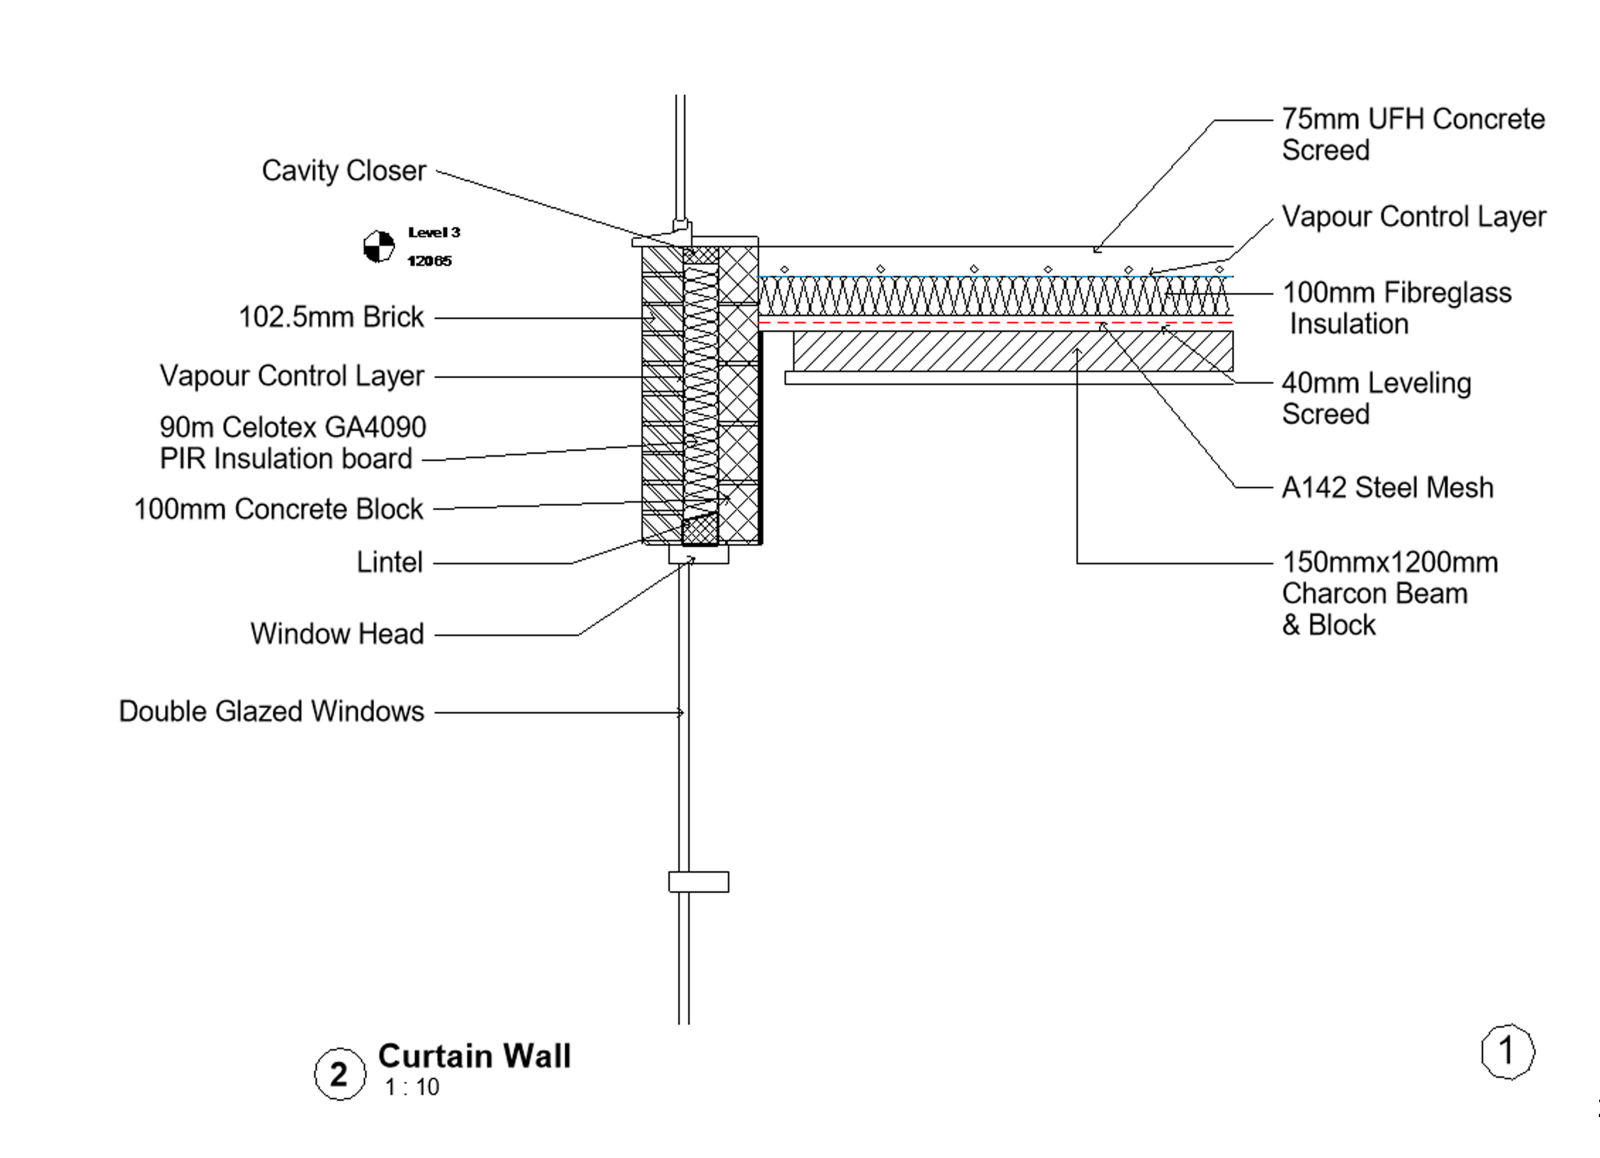 A Typical Curtain Wall Detail Showing The Part That W - vrogue.co